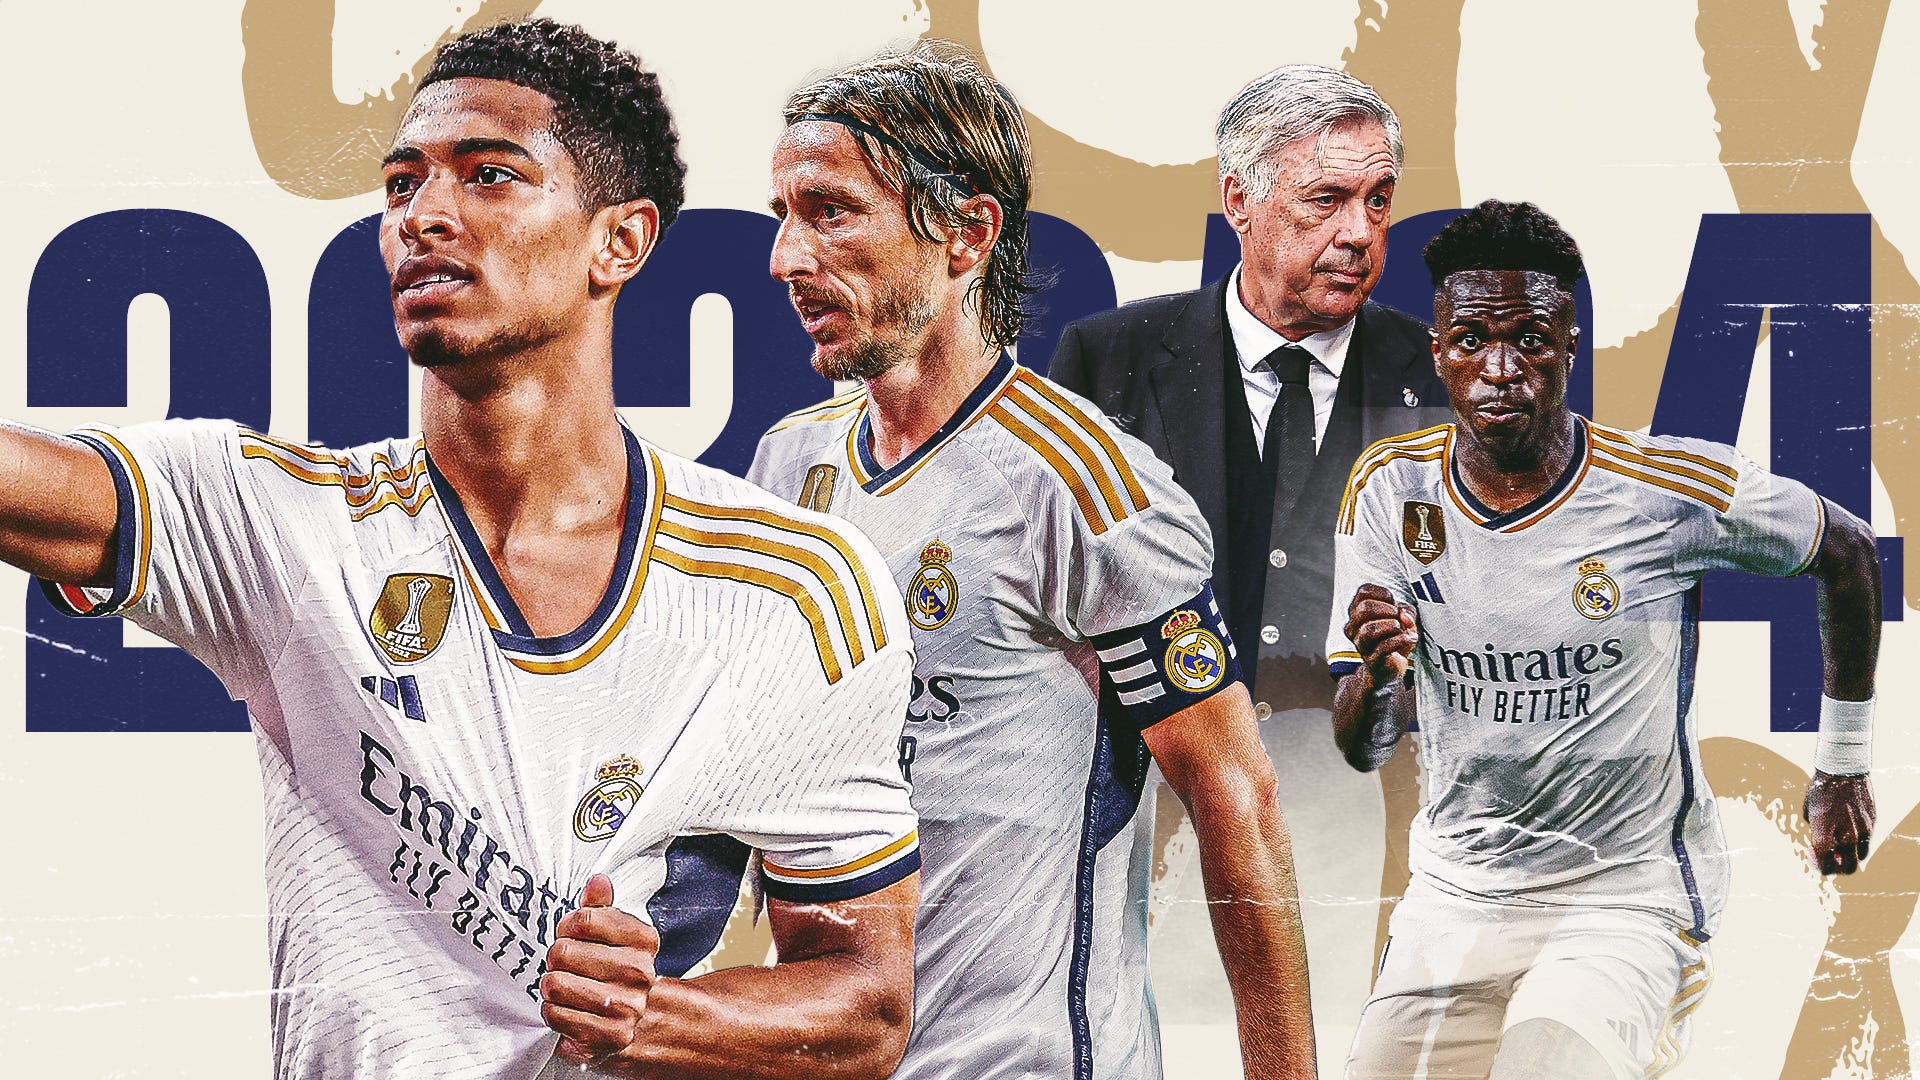 The 7 Real Madrid players currently set to leave on a free this summer